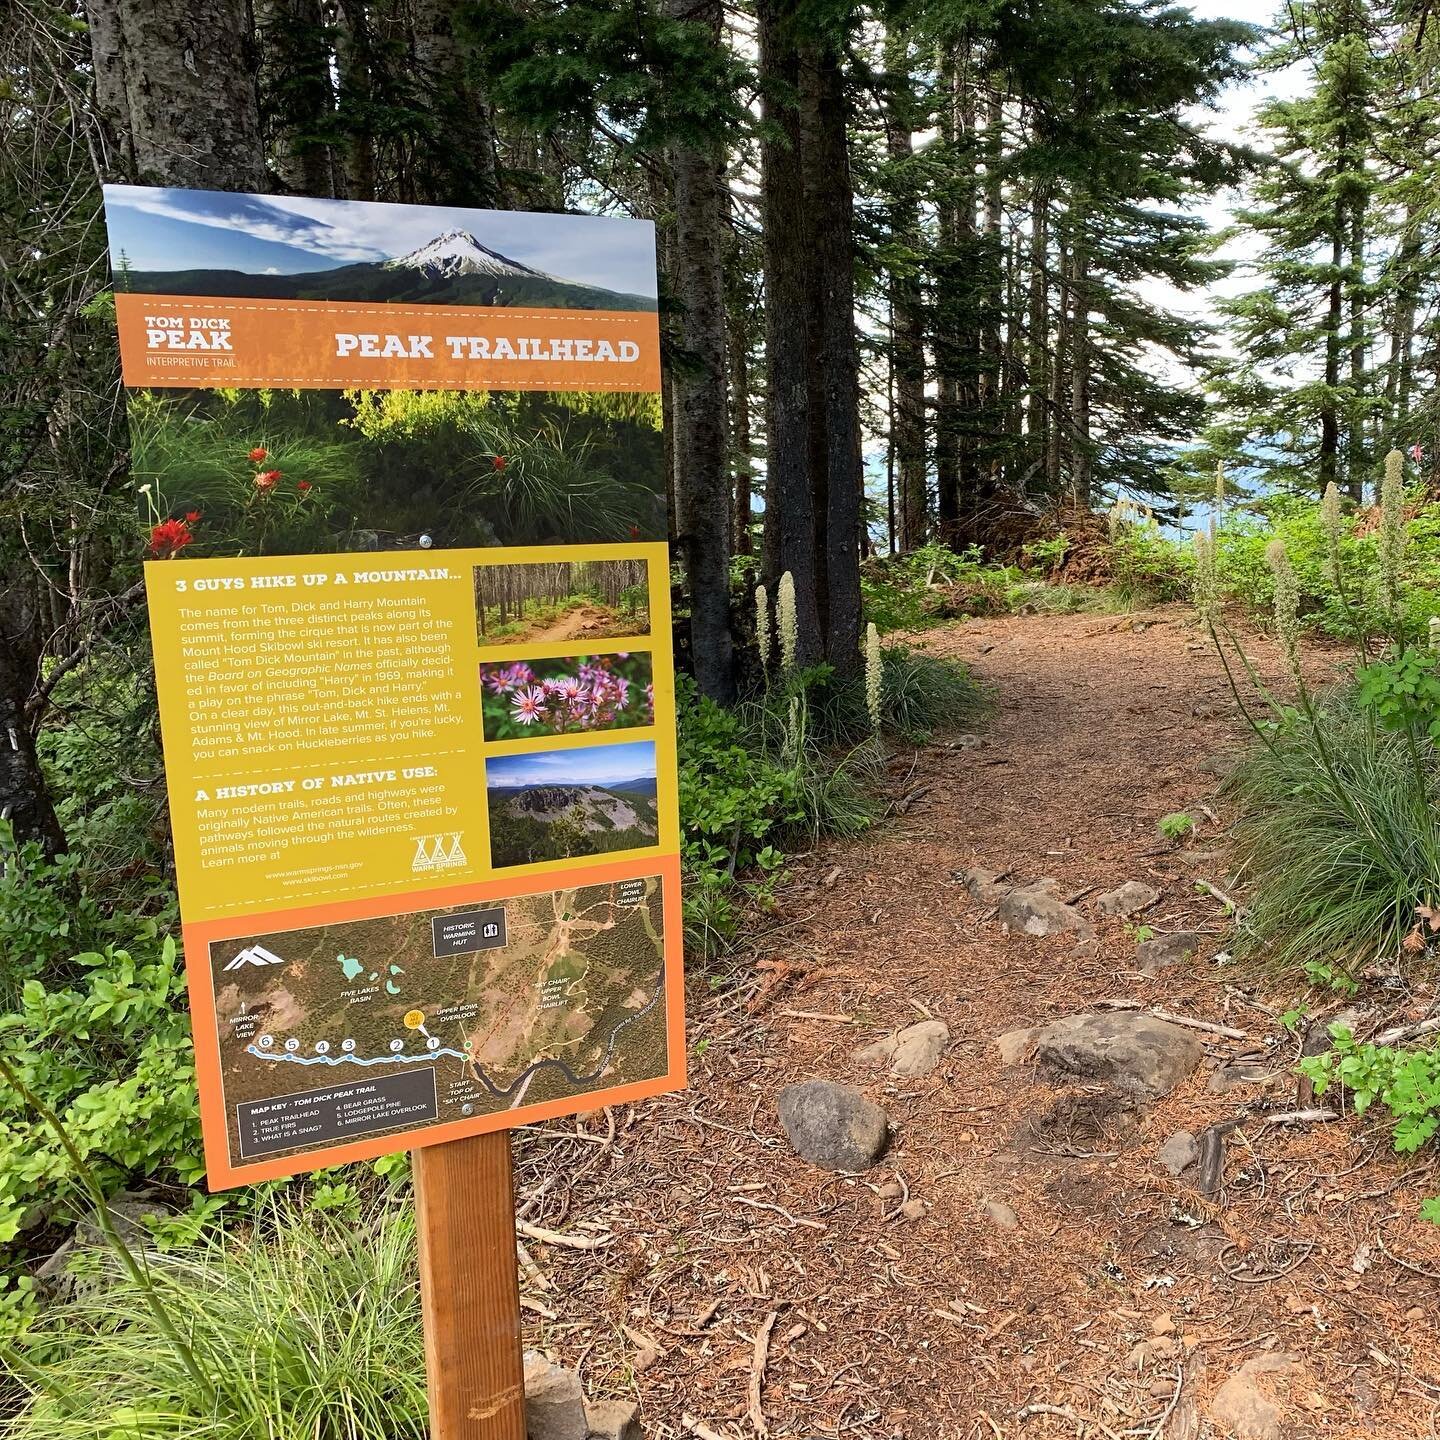 I&rsquo;m so excited to finally see this project out in the wild. It&rsquo;s been a blast working with the amazing, one-of-a-kind Frances Martinez to take her vision for Mt Hood Skibowl&rsquo;s interpretive trails to the next level. We aimed to provi